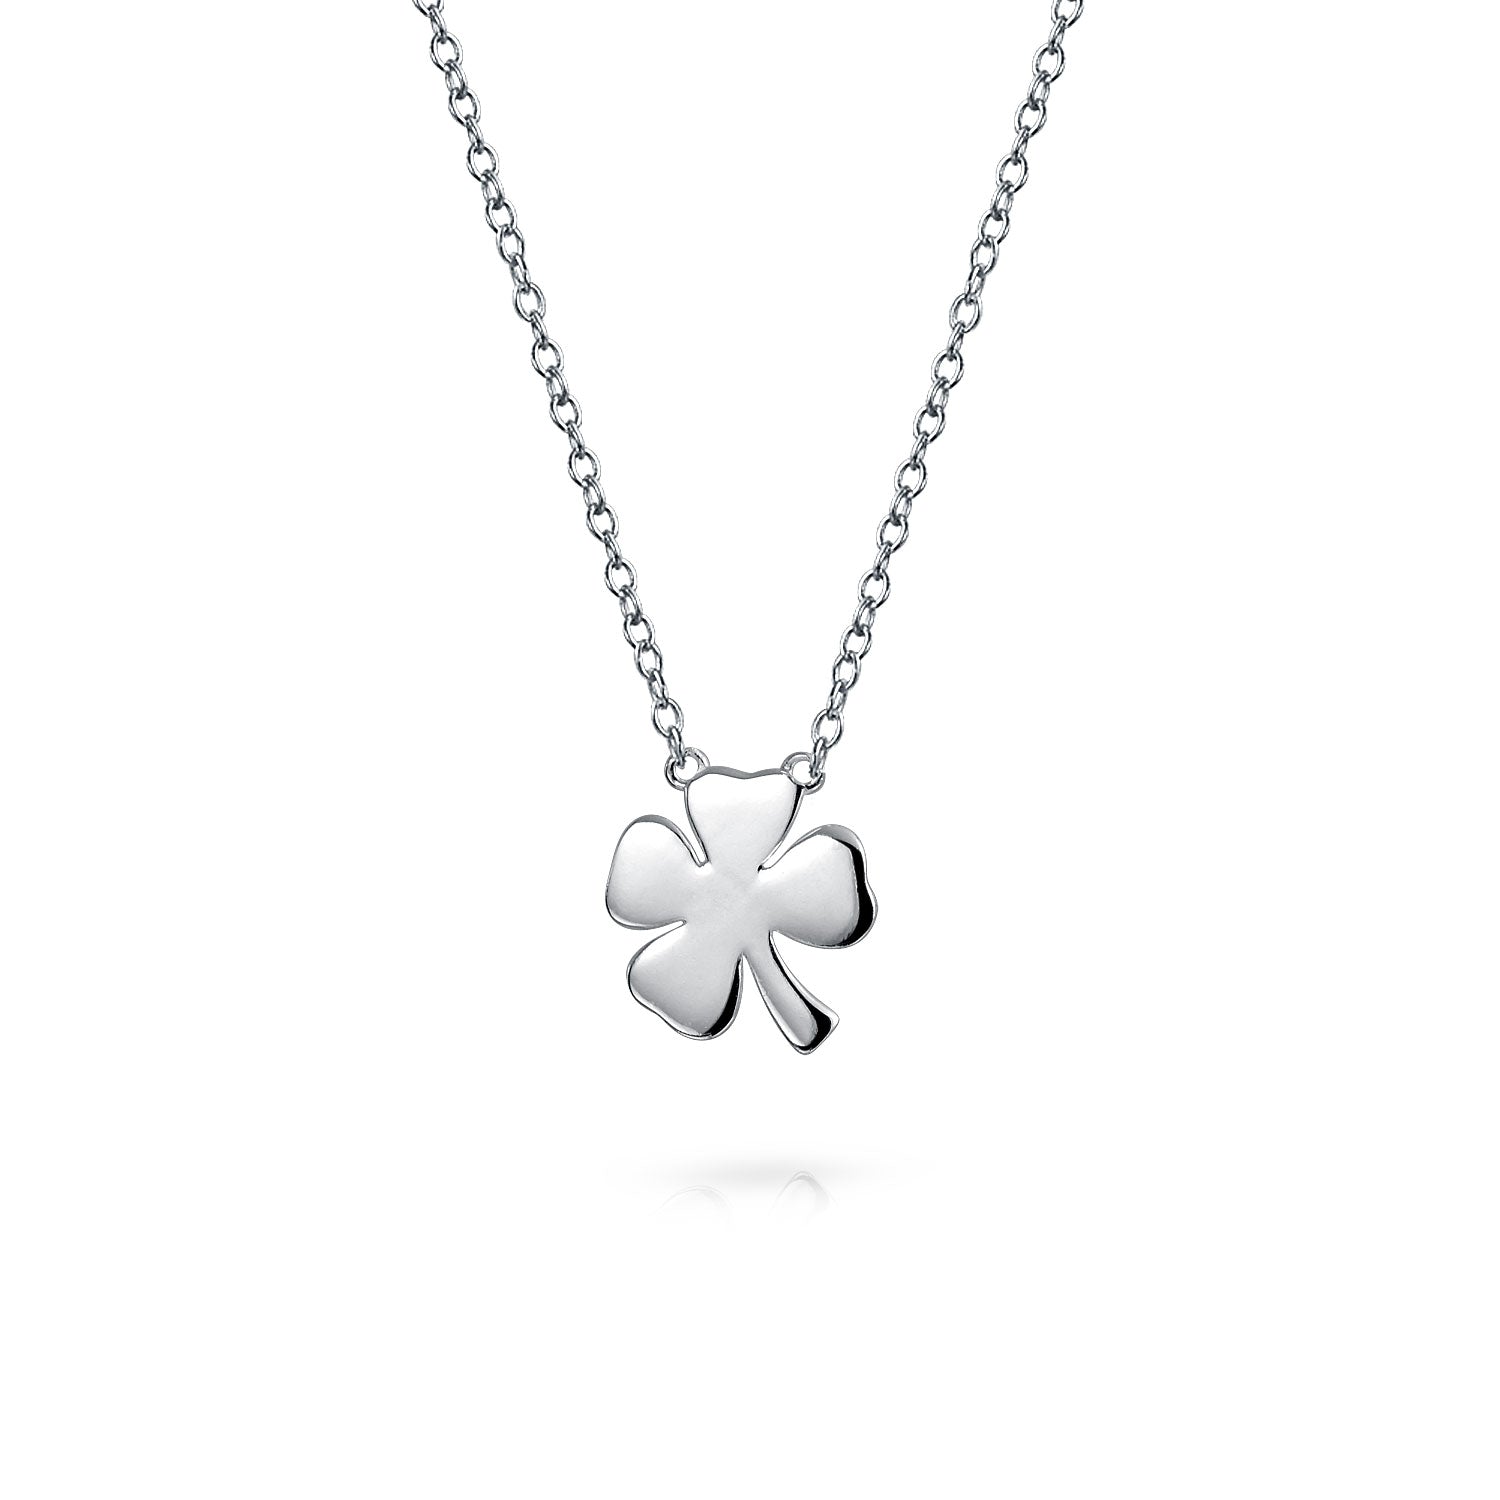 Jewelry, Silver Black Clover Long Necklace